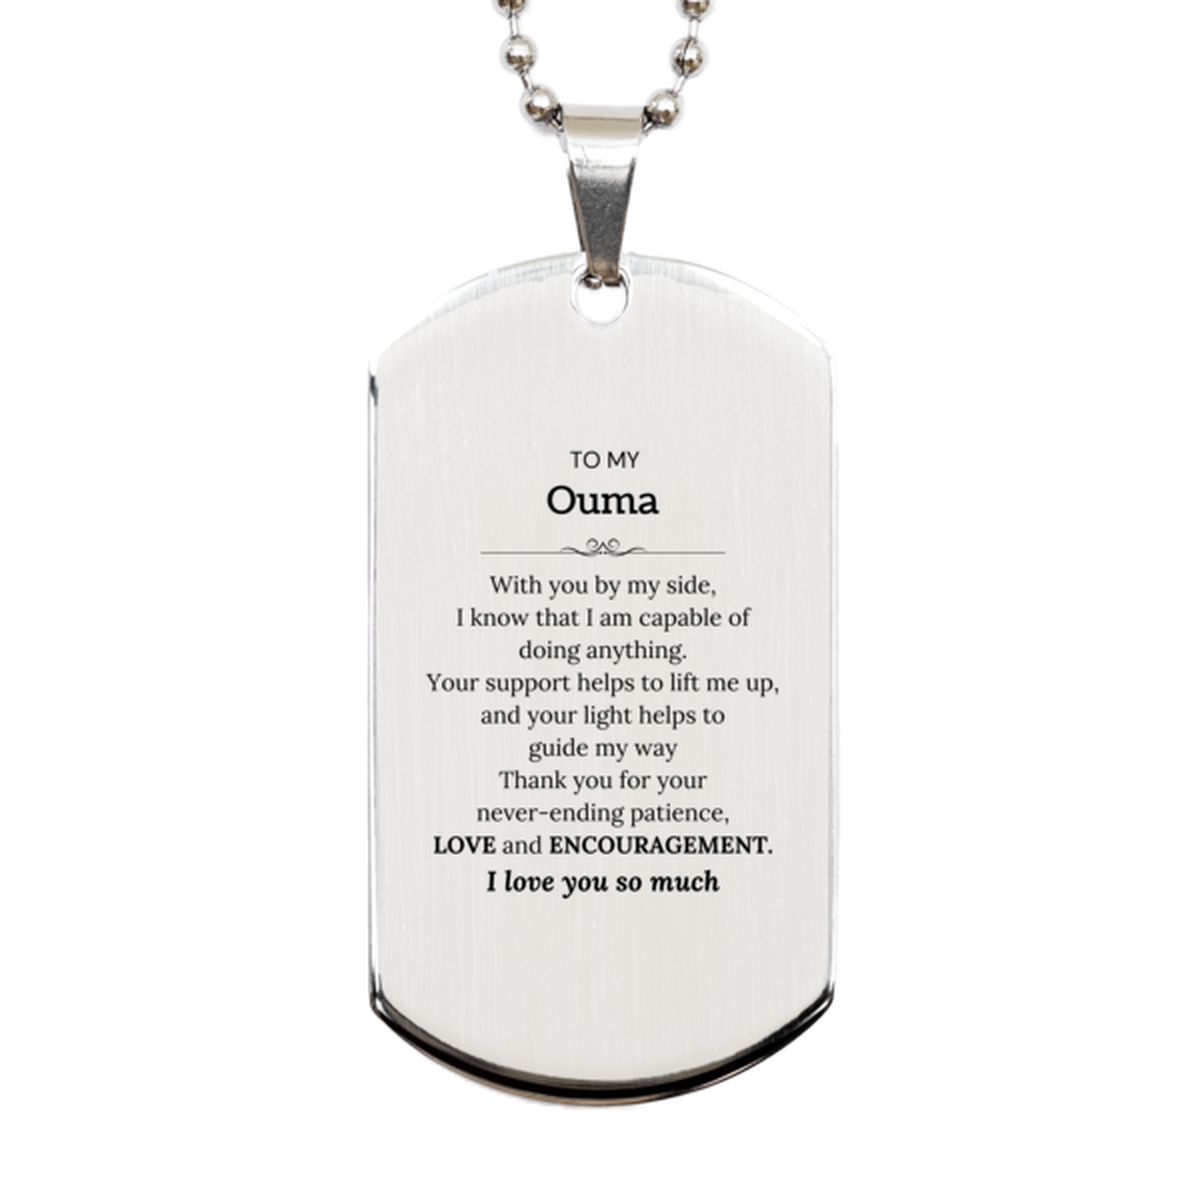 Appreciation Ouma Silver Dog Tag Gifts, To My Ouma Birthday Christmas Wedding Keepsake Gifts for Ouma With you by my side, I know that I am capable of doing anything. I love you so much